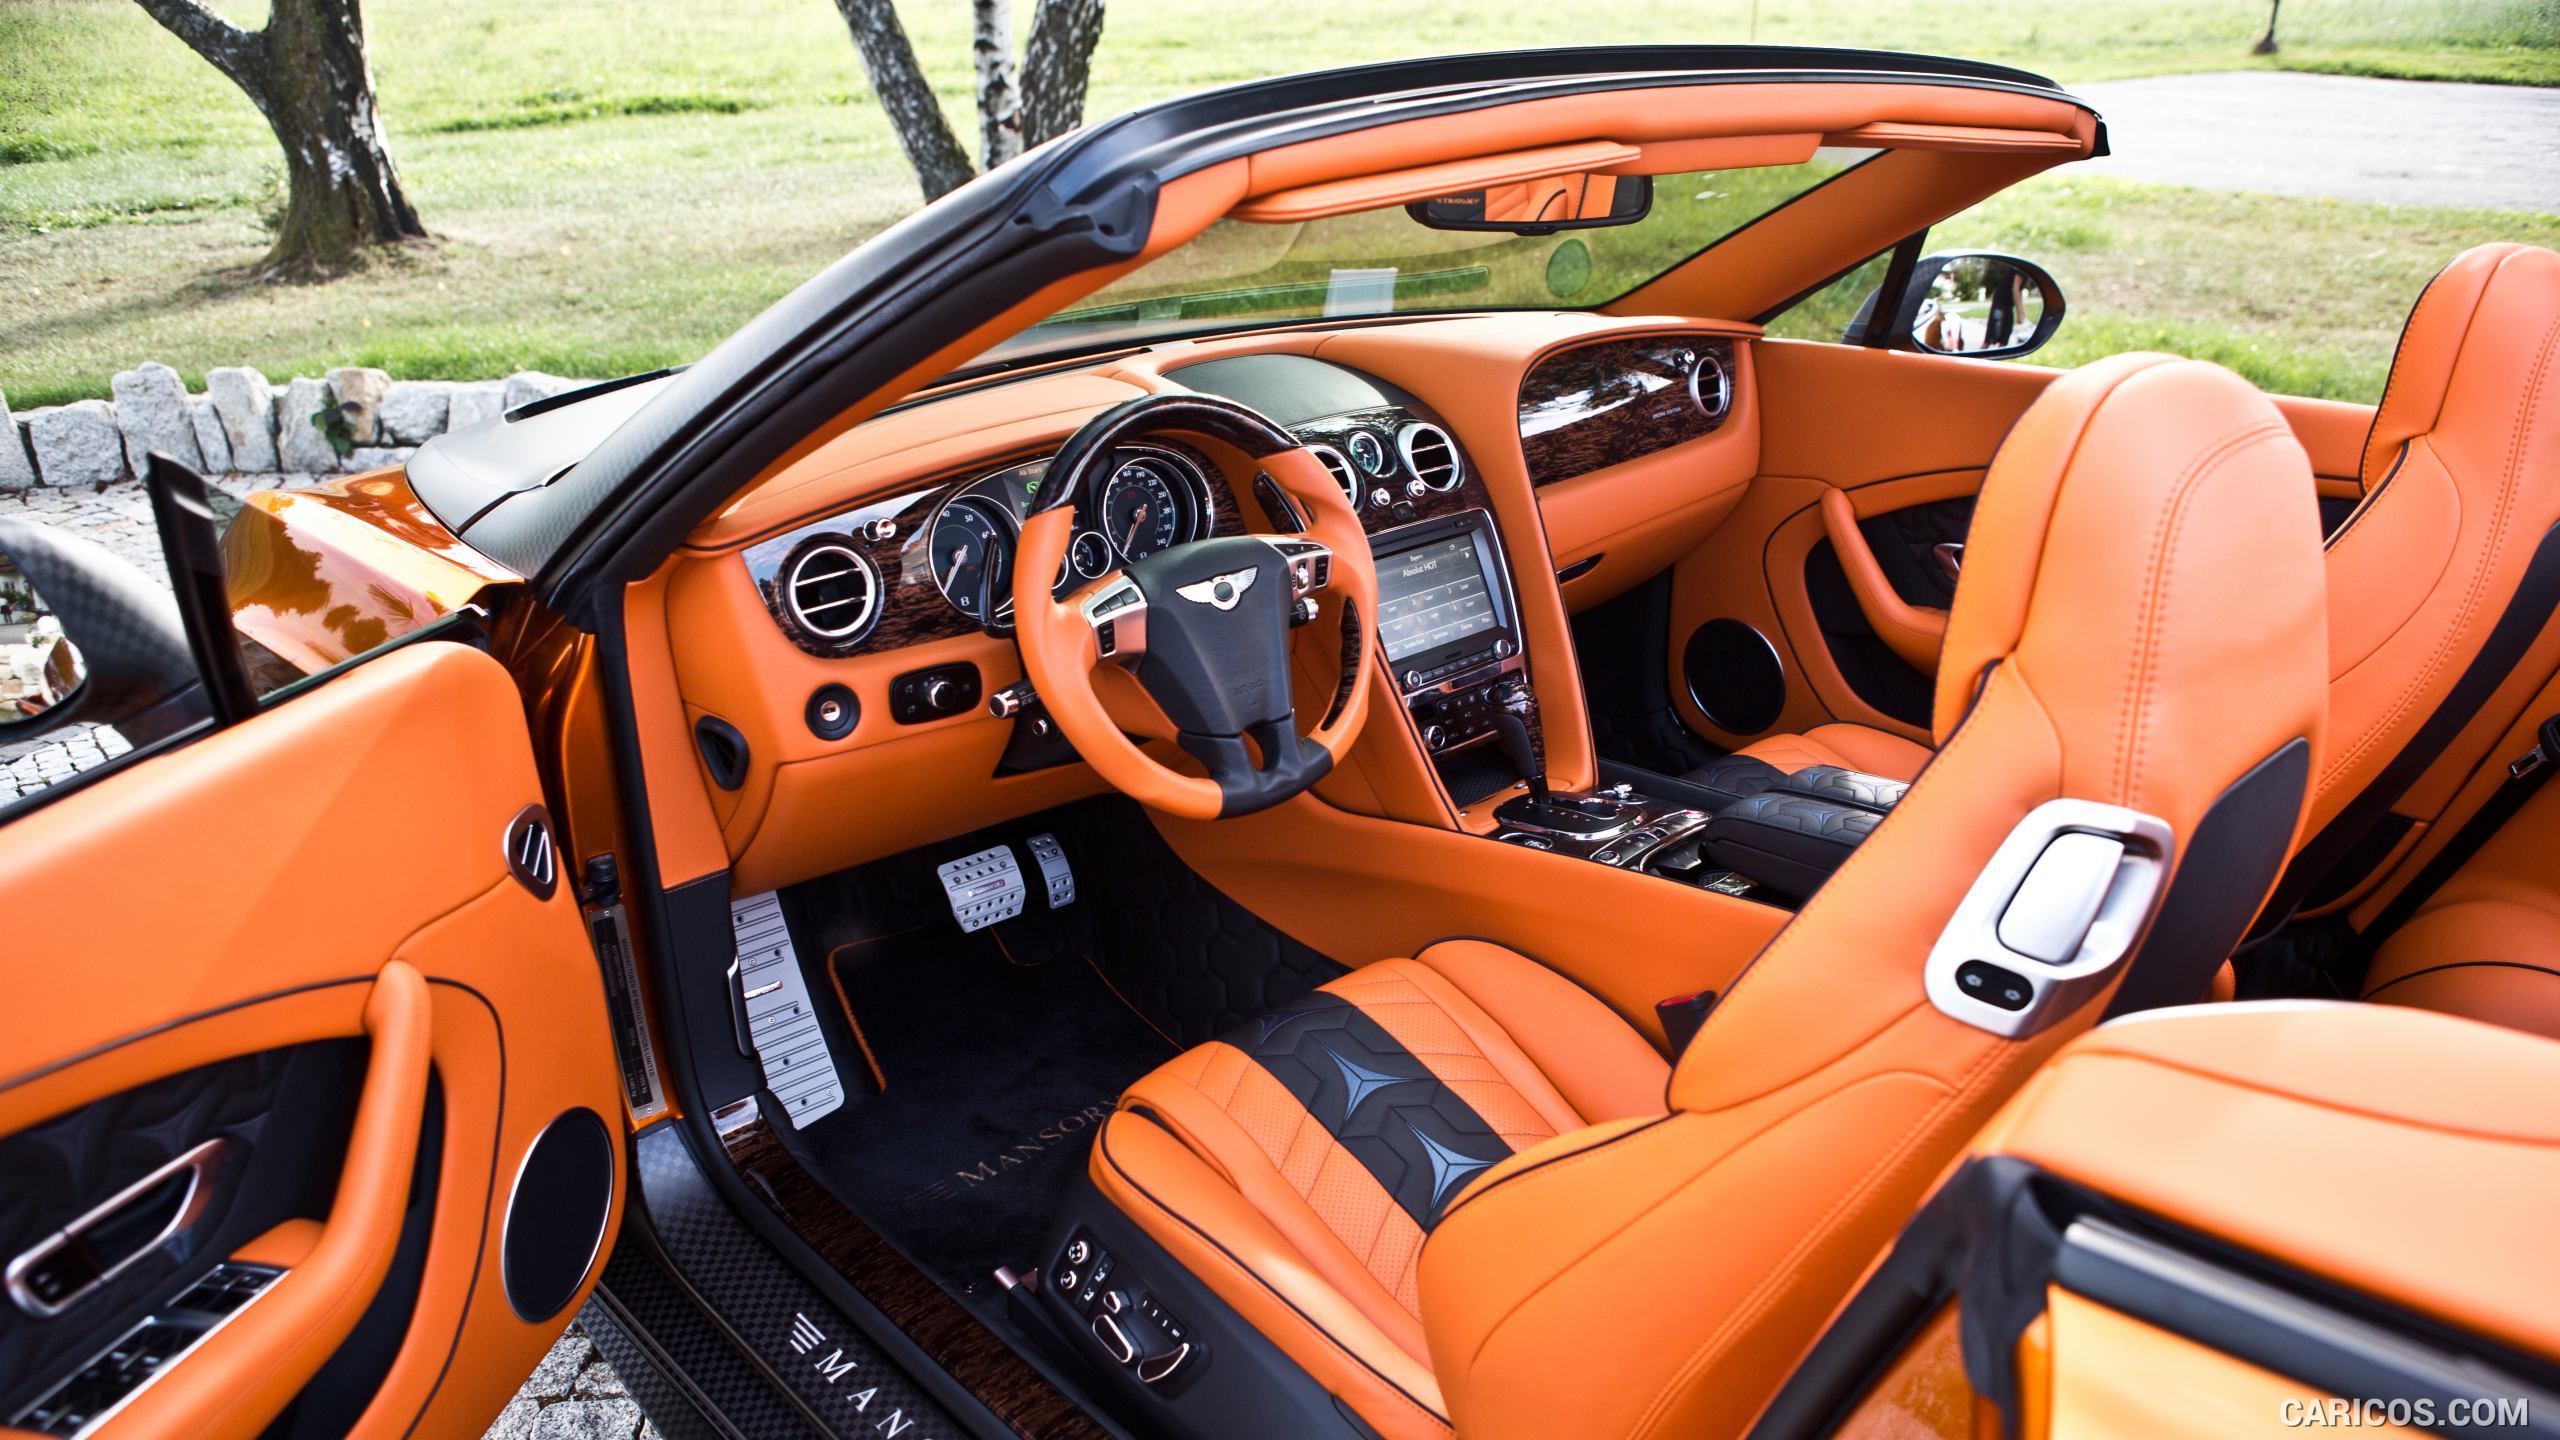 2016 MANSORY Bentley Continental GT Convertible - Interior, #11 of 13